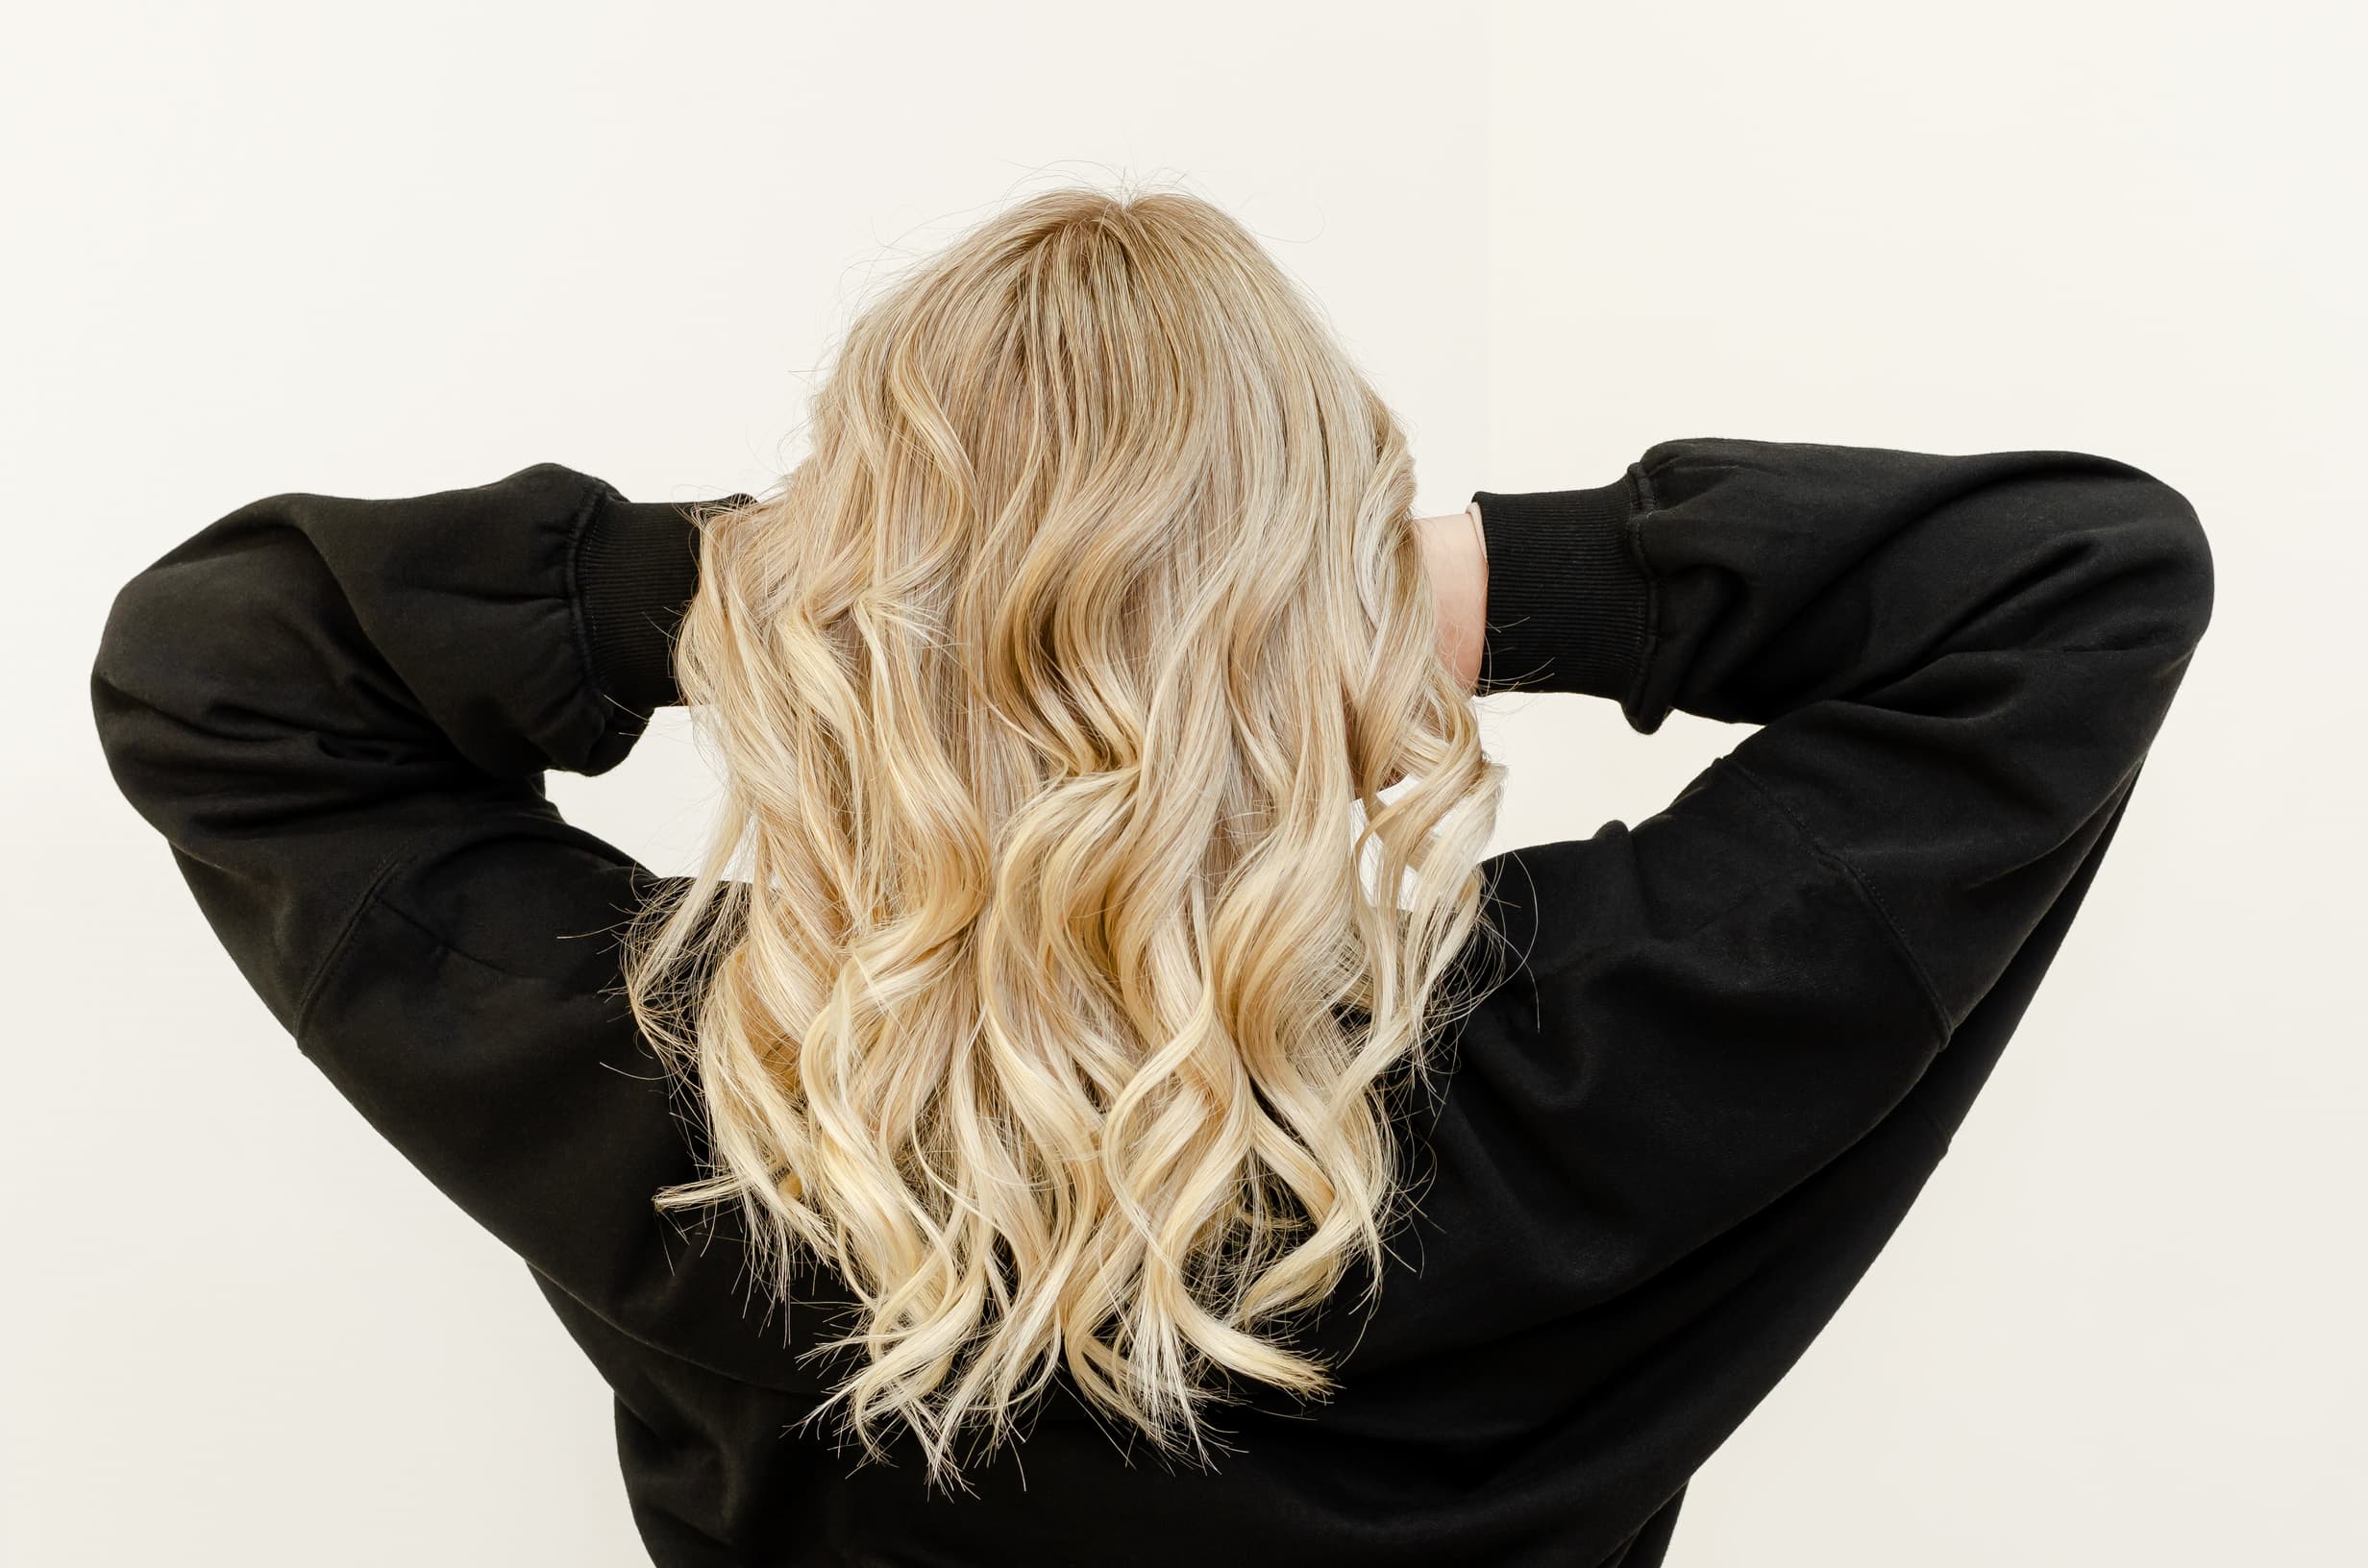 What You Need to Know About Balayage